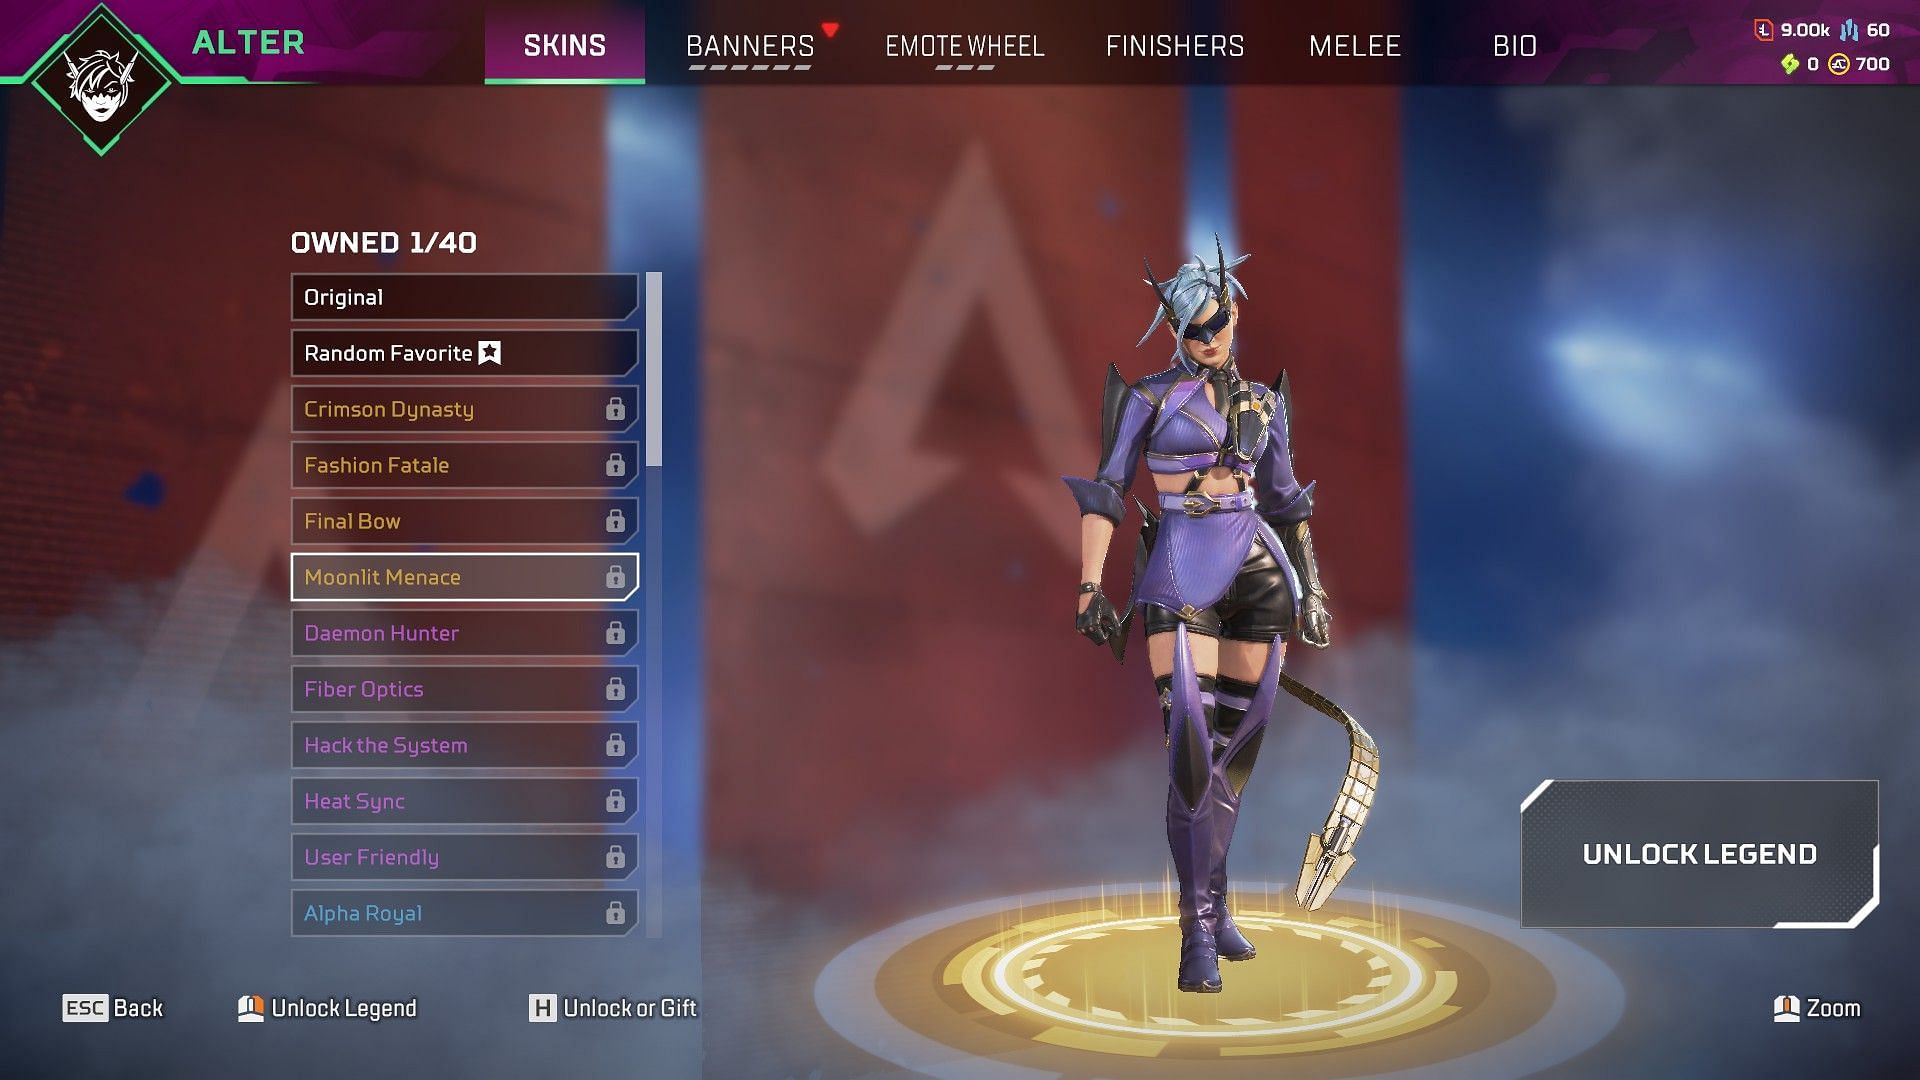 Moonlit Menace Legendary is one of the best Alter skins in Apex Legends (Image by Electronic Arts)